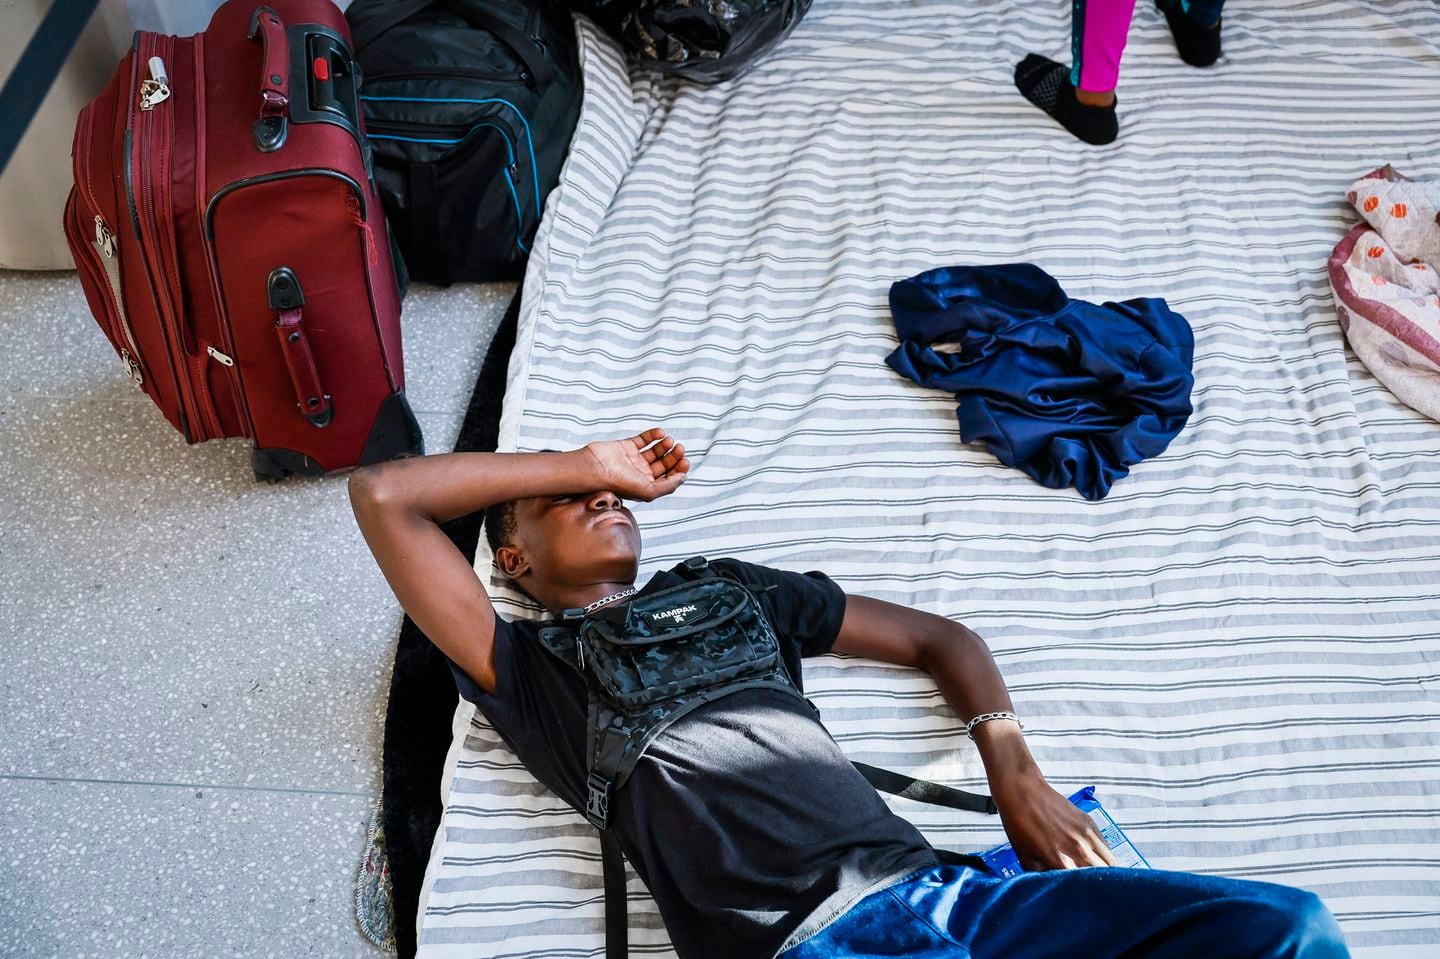 Guivensly Joseph, 14, rested on his family’s makeshift bed after arriving at Logan International Airport, where the family would stay the night.